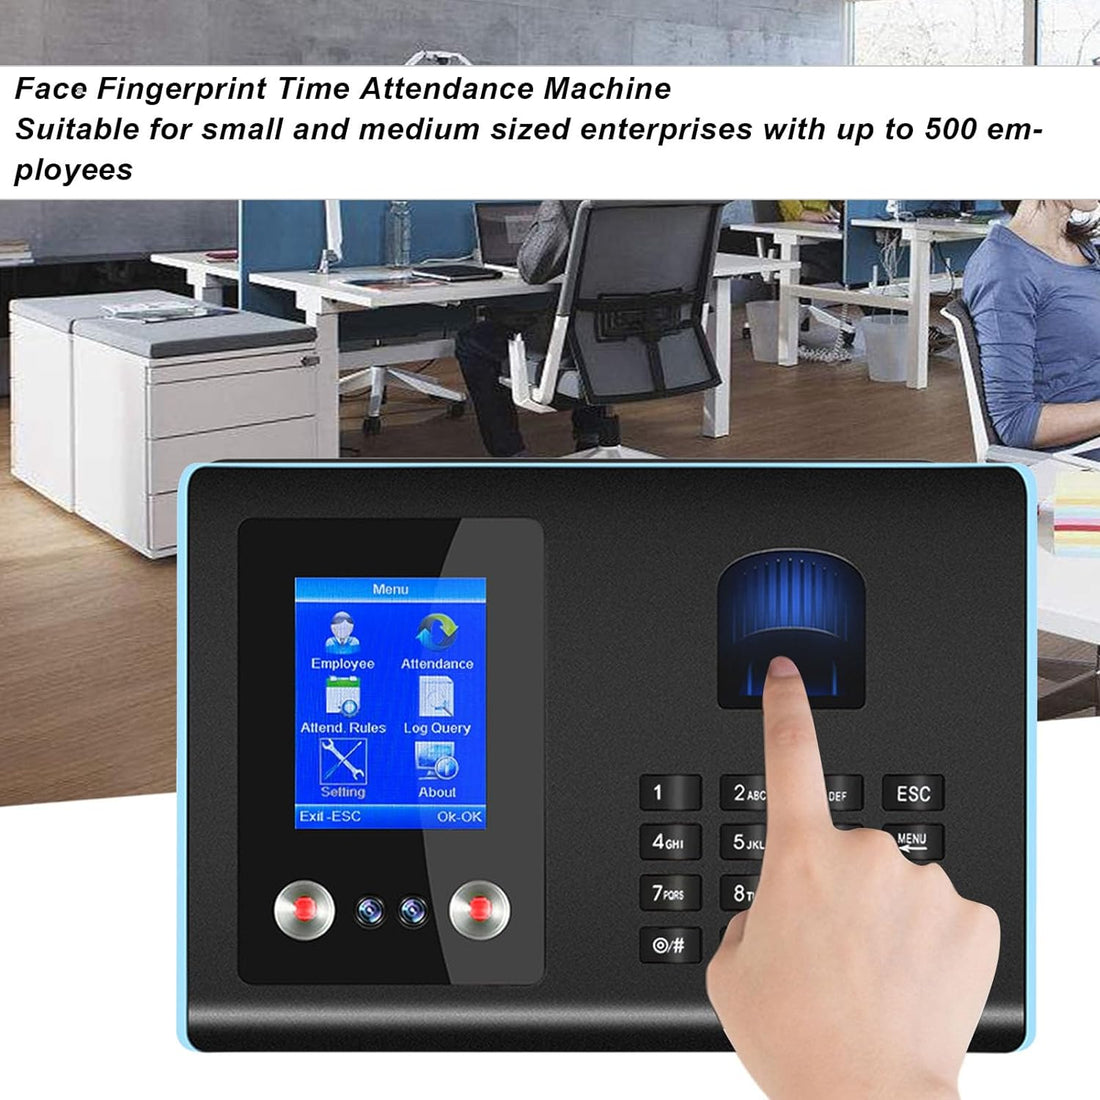 Face Fingerprint Time Attendance Machine with Automatic Time Calculation, Biometric Employee Attendance for Offices, Hotels, and More (US Plug)